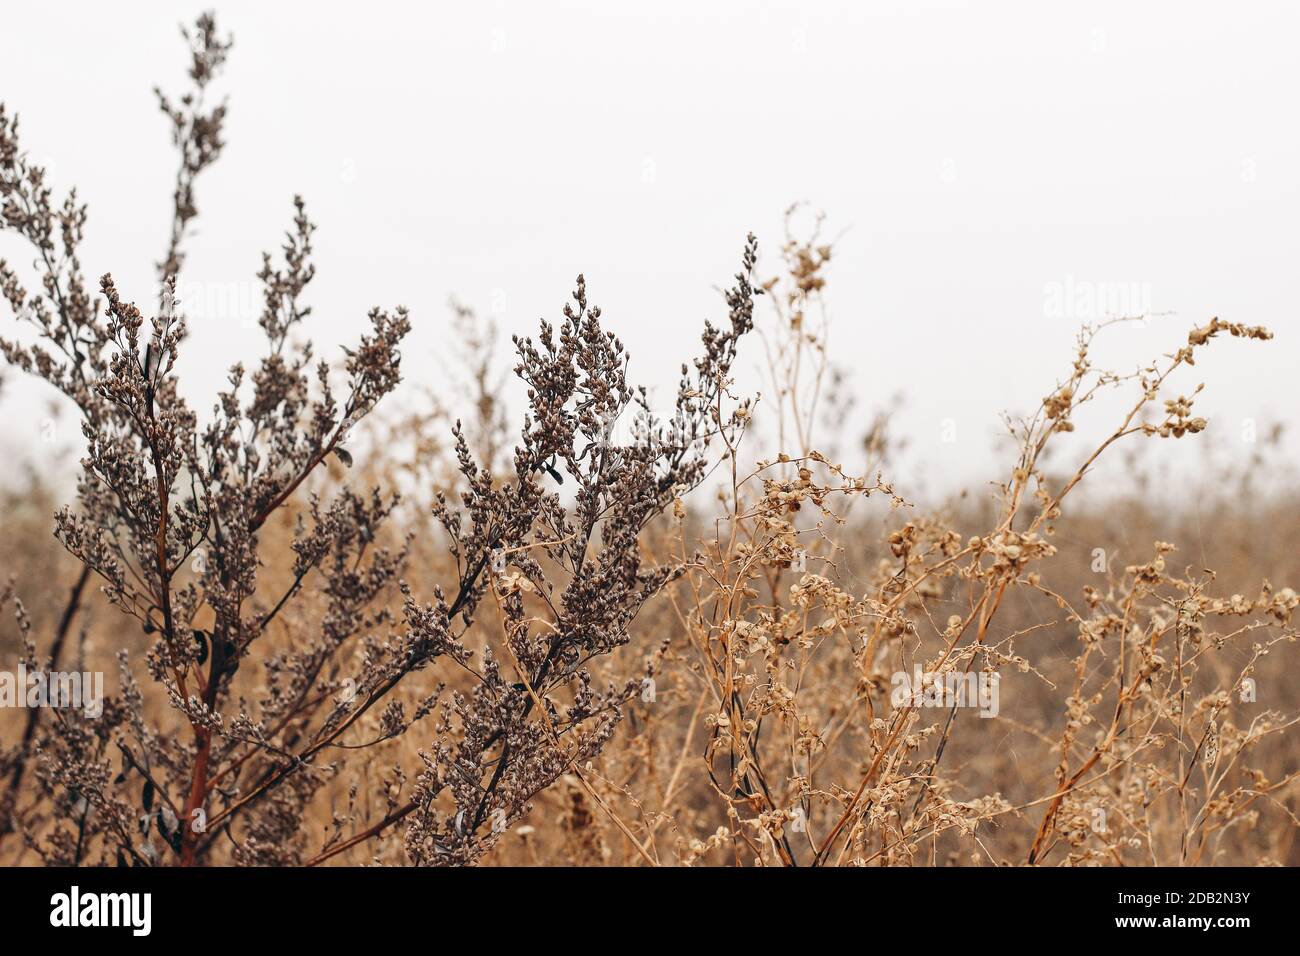 Field of fading brown weed againts grey sky. Misty Autumn landscape. Closeup of dry wild artemisia and chenopodium plants. Selective focus, blurred Stock Photo